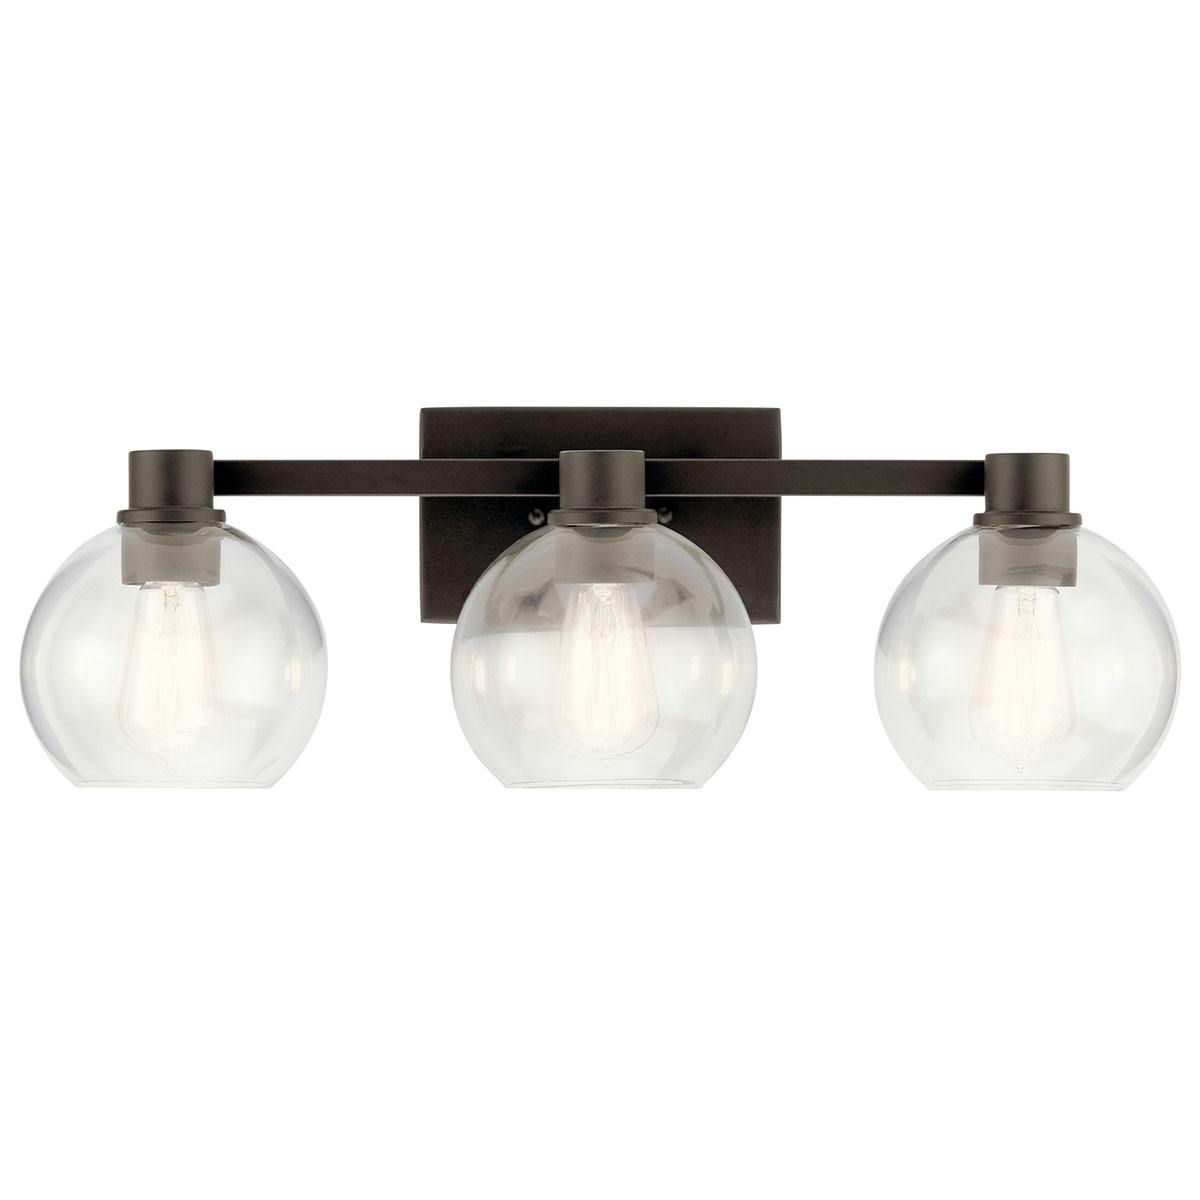 The Harmony 3 Light Vanity Light Olde Bronze® facing down on a white background